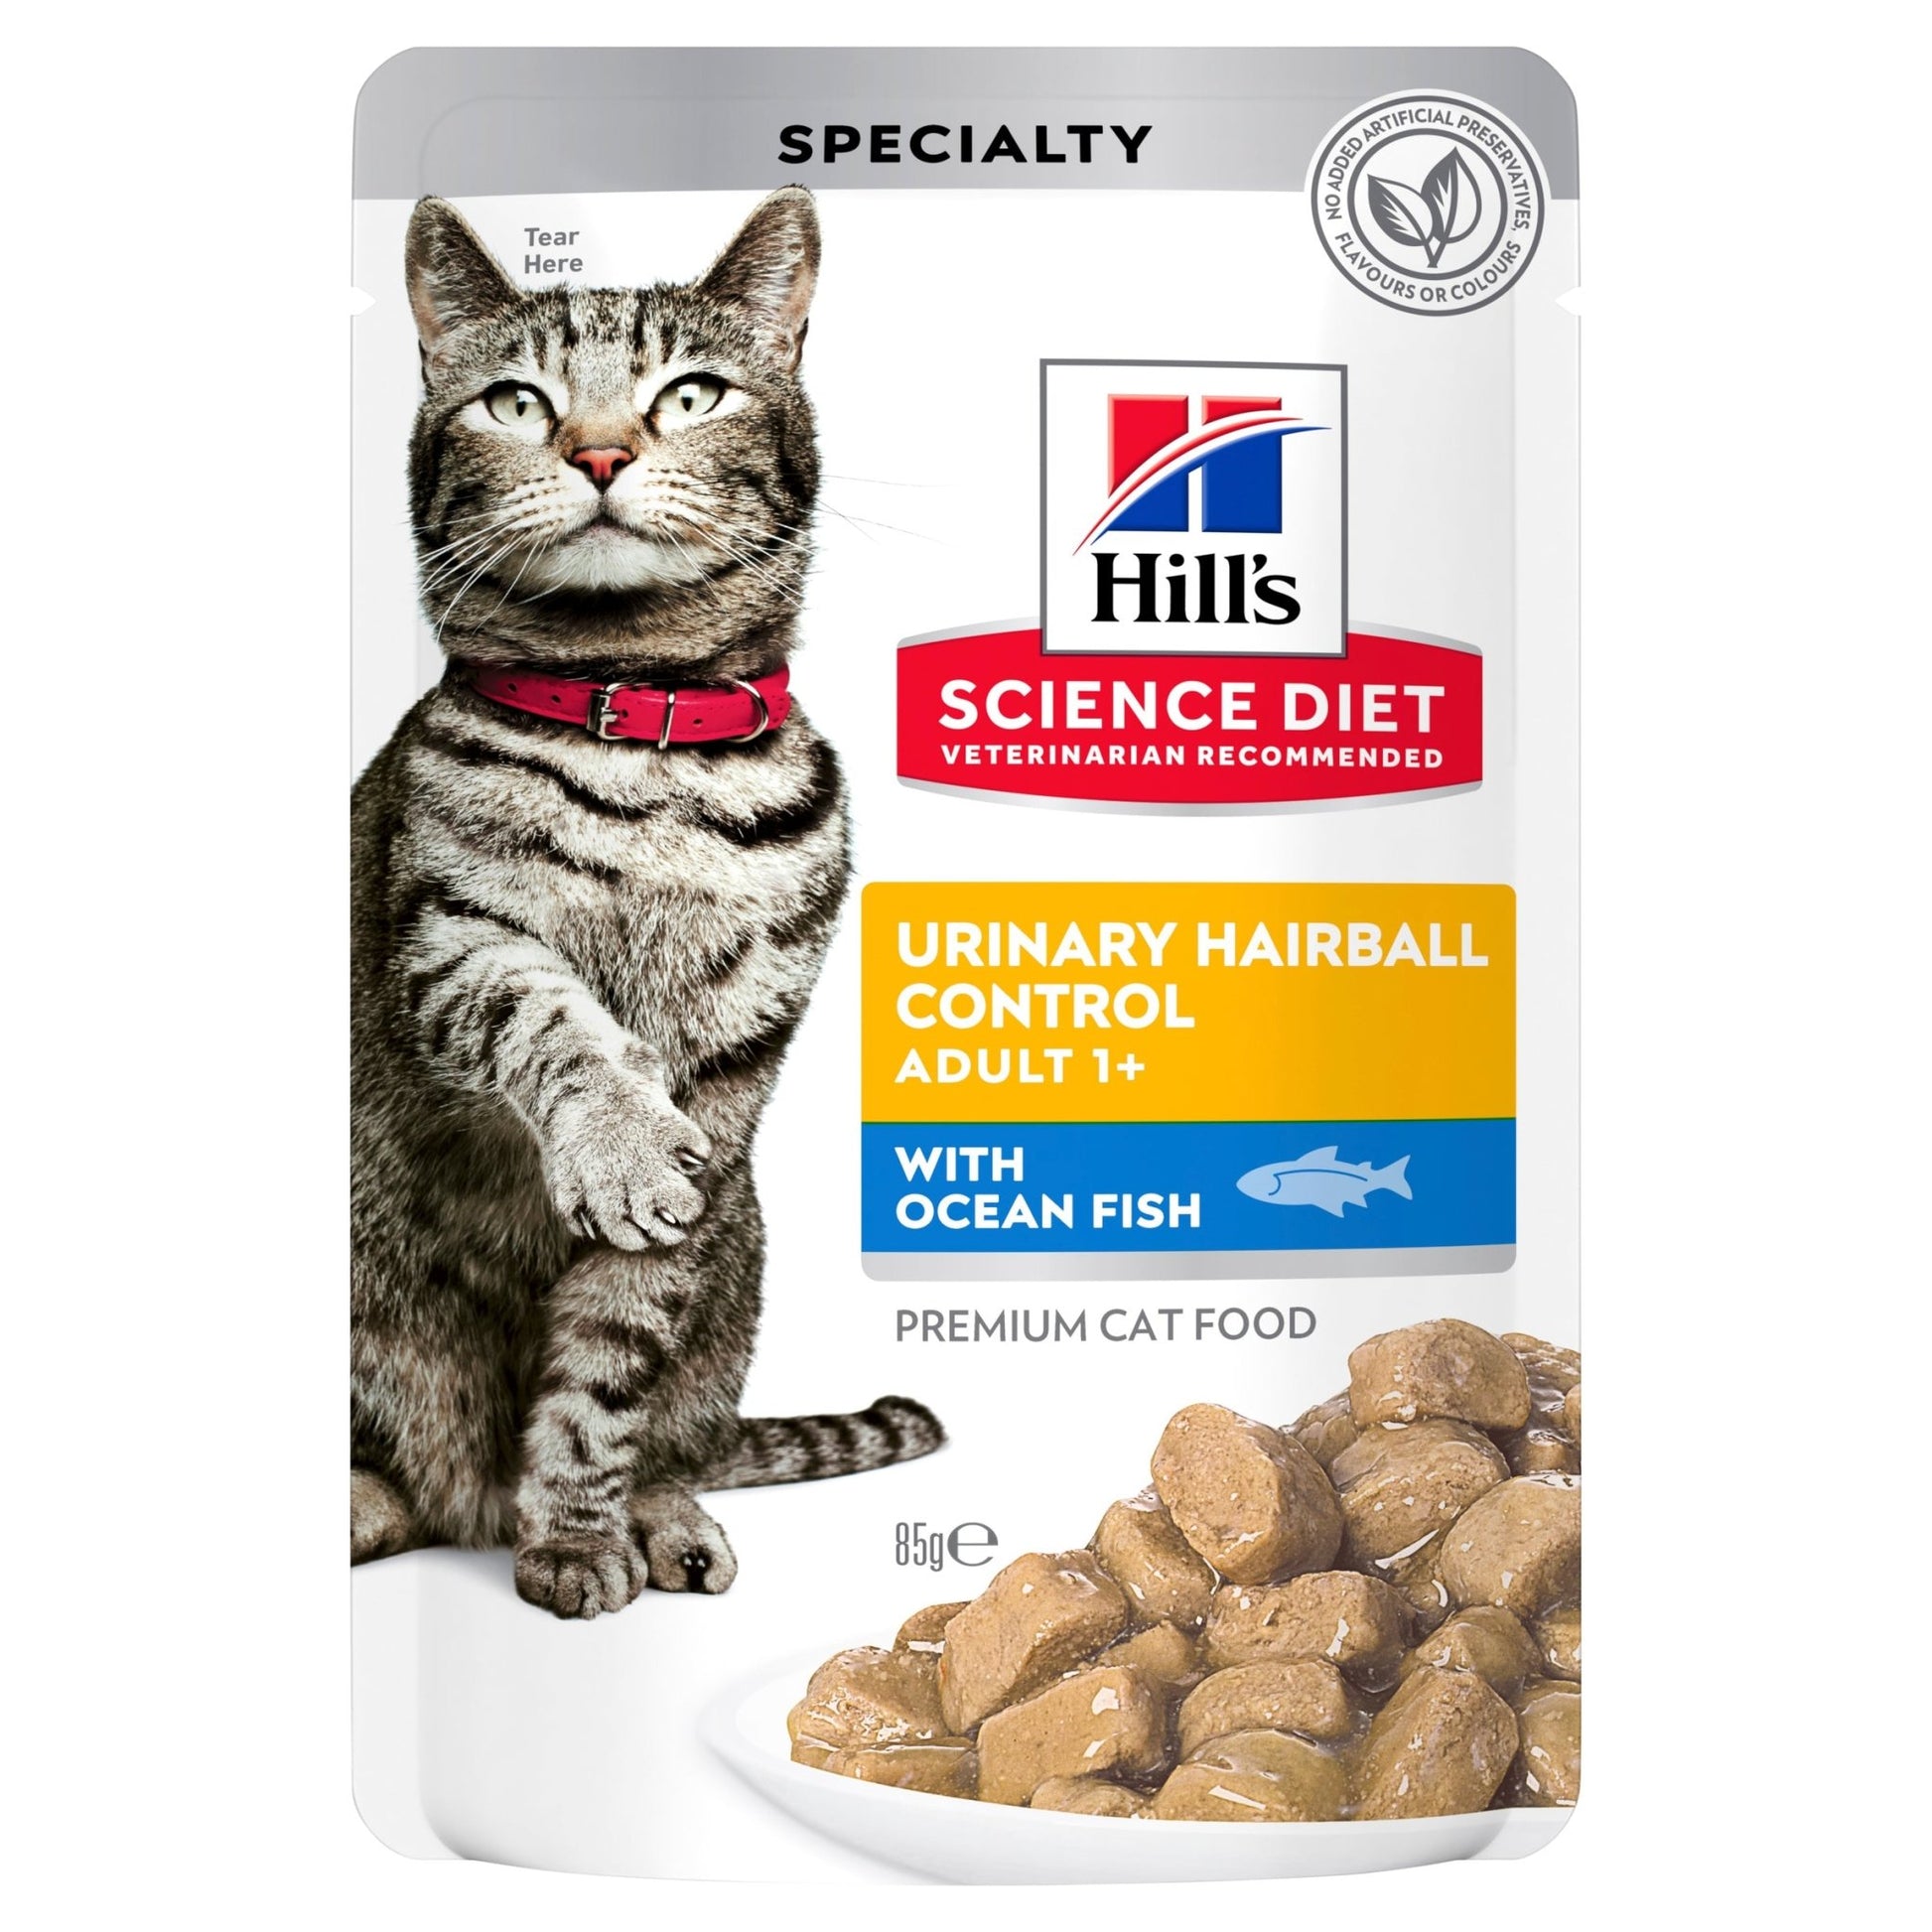 Hill's Science Diet Adult Urinary Hairball Control Ocean Fish Cat Food pouches 12x85g - Woonona Petfood & Produce